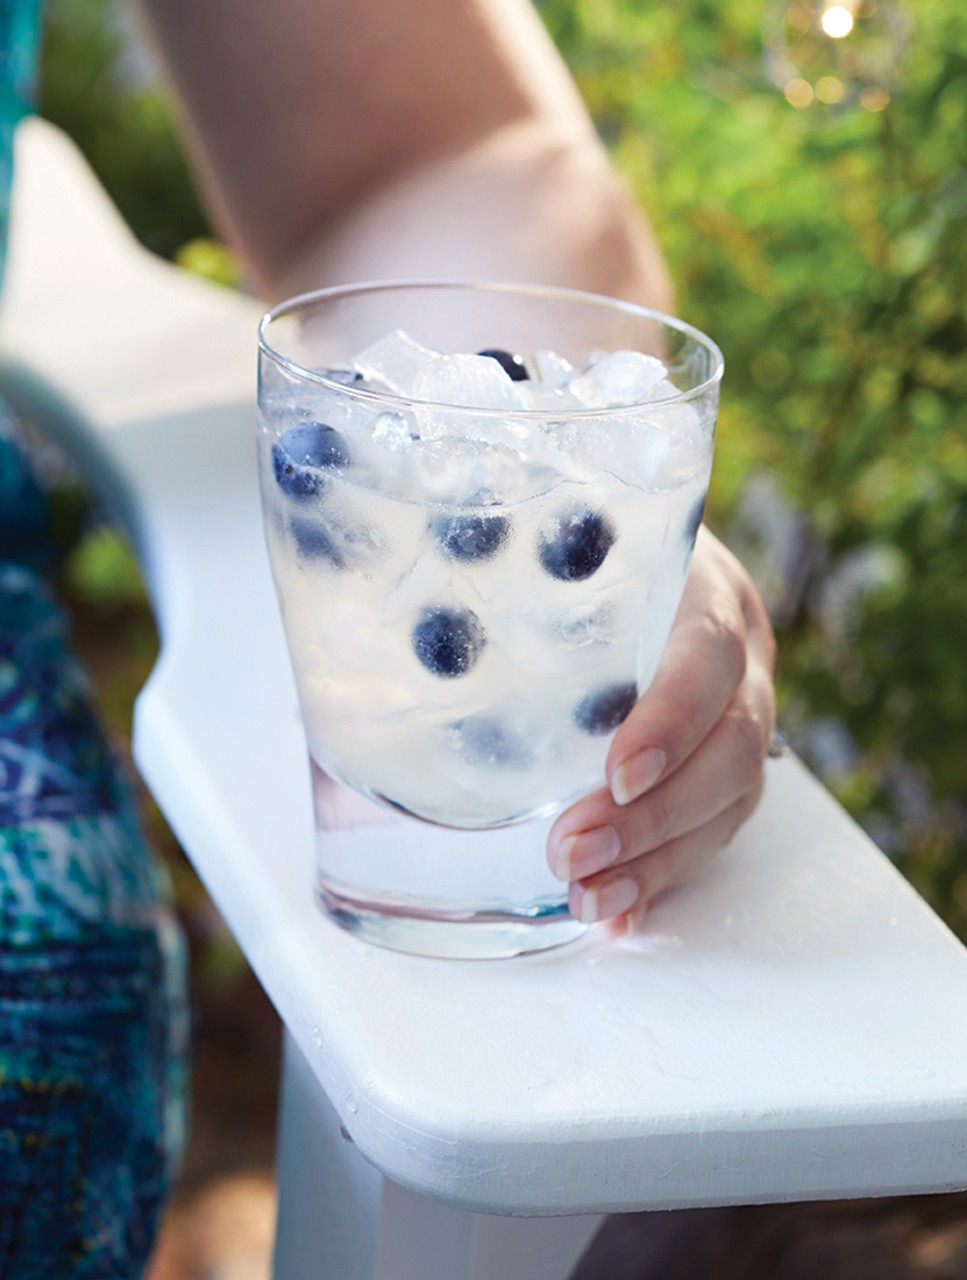 The Blueberry Maple Cocktail